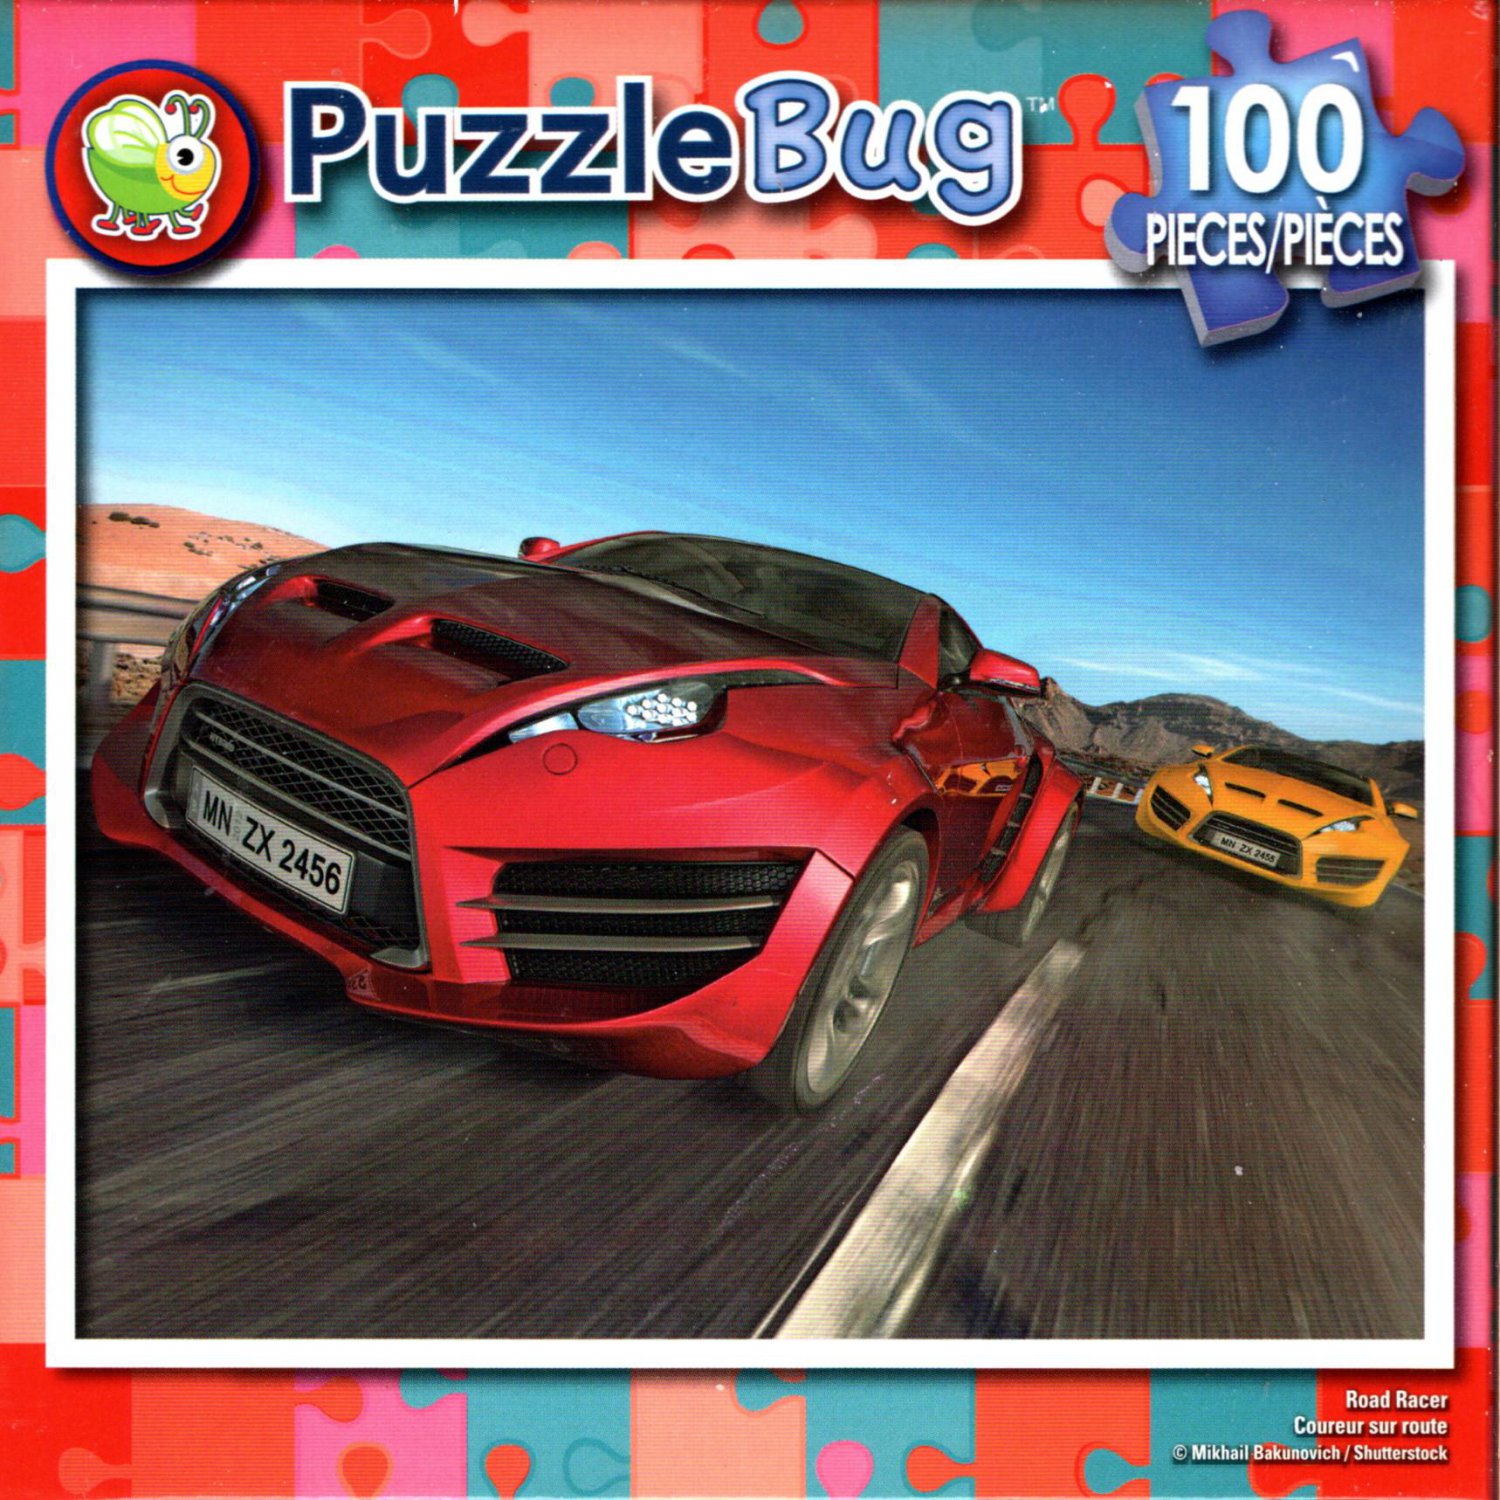 Road Racer - 100 Pieces Jigsaw Puzzle